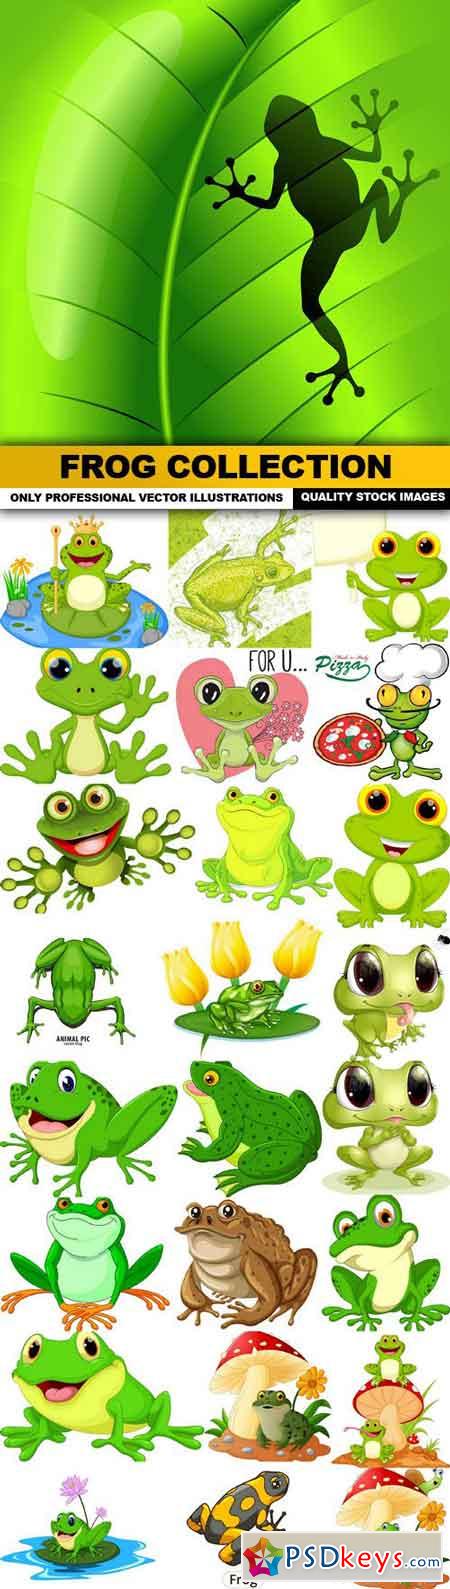 Frog Collection- 25 Vector